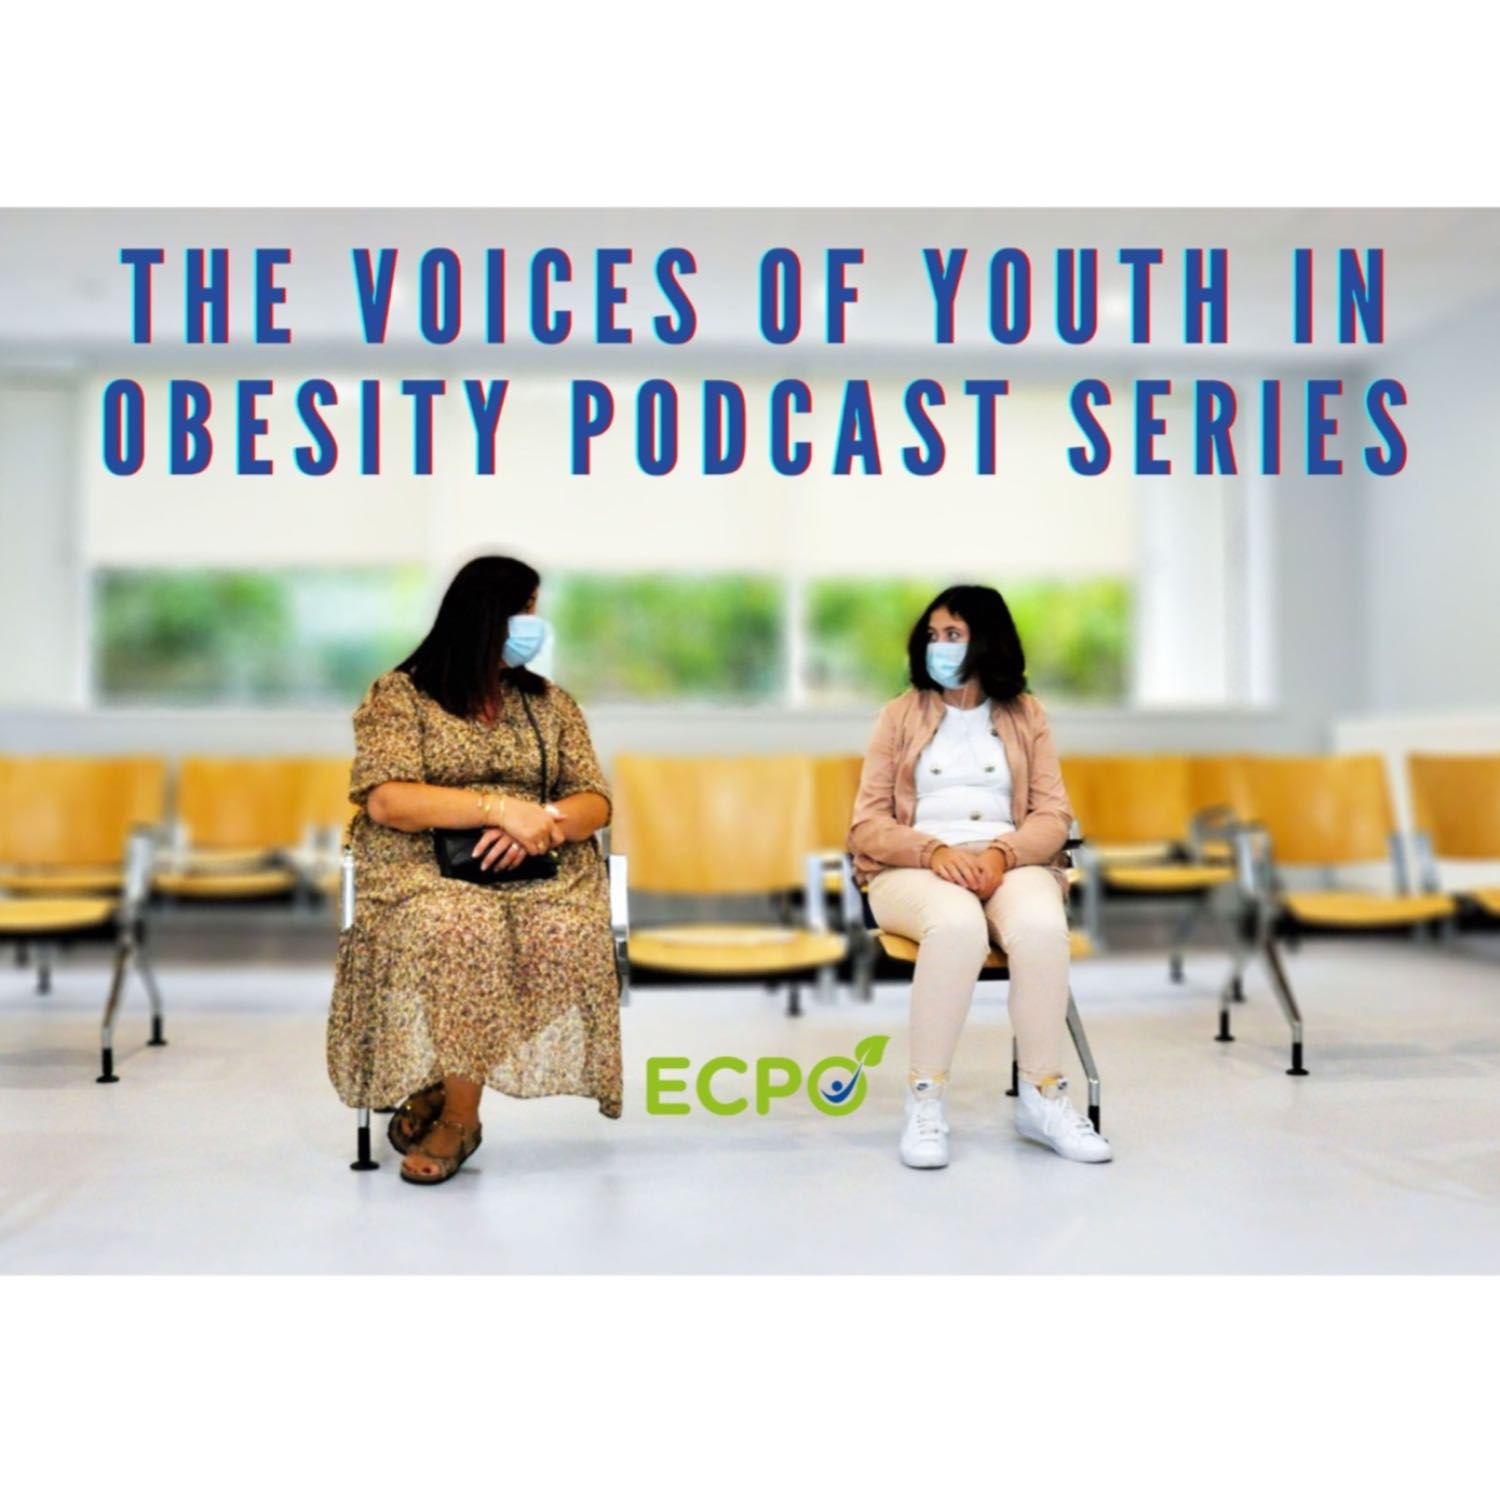 Voices of Youth in Obesity - Breaking the silence on teenage obesity